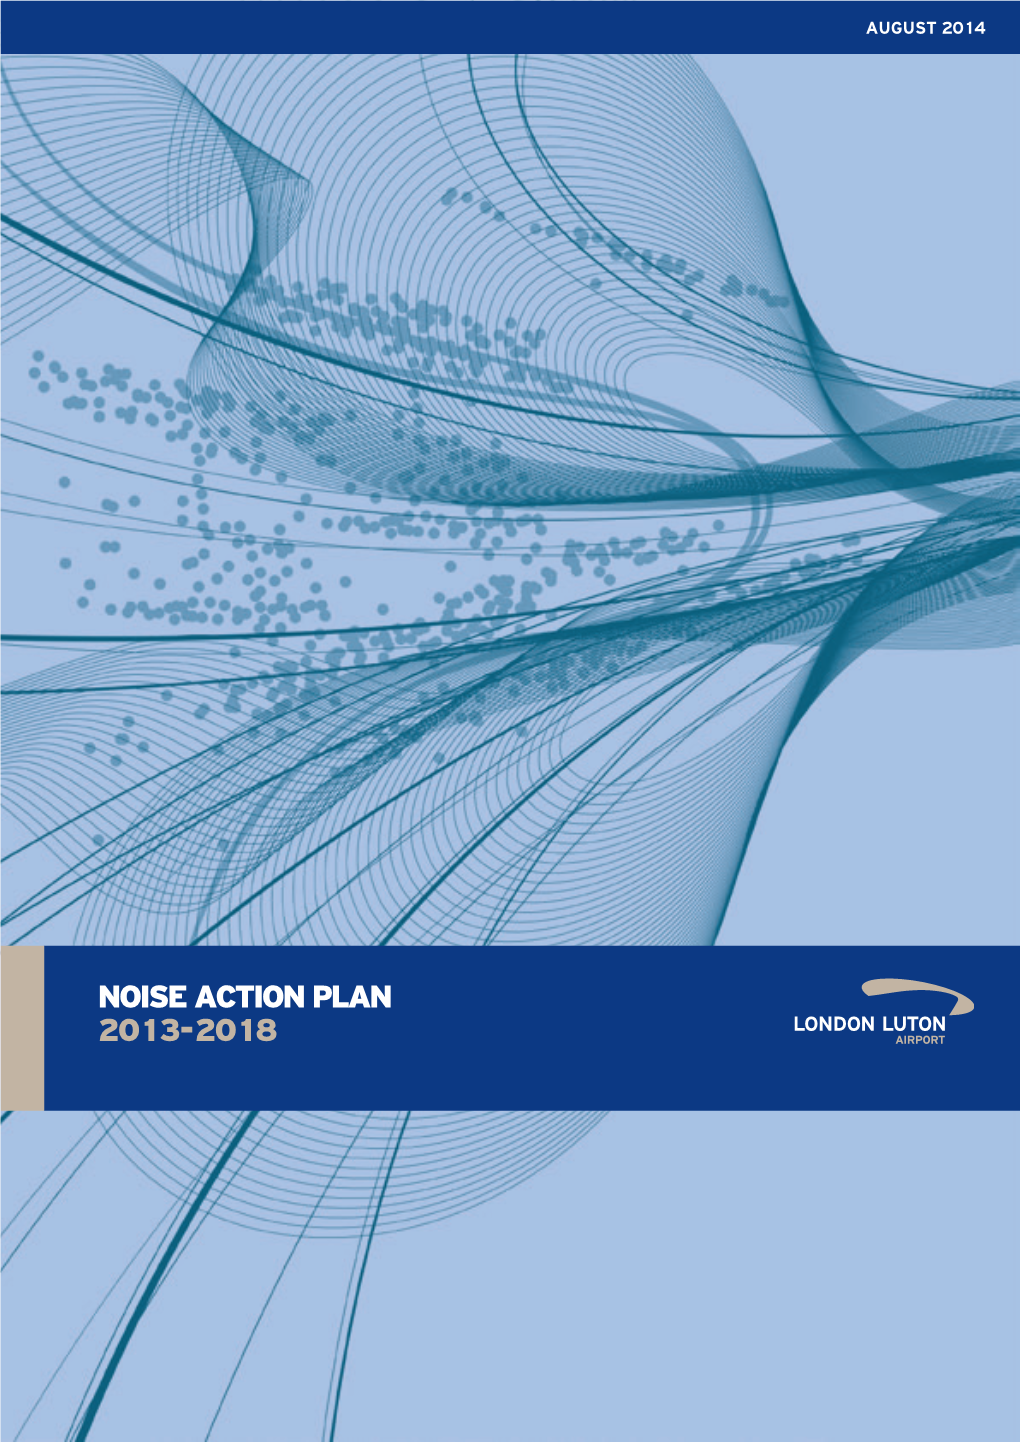 Noise Action Plan 2013-2018